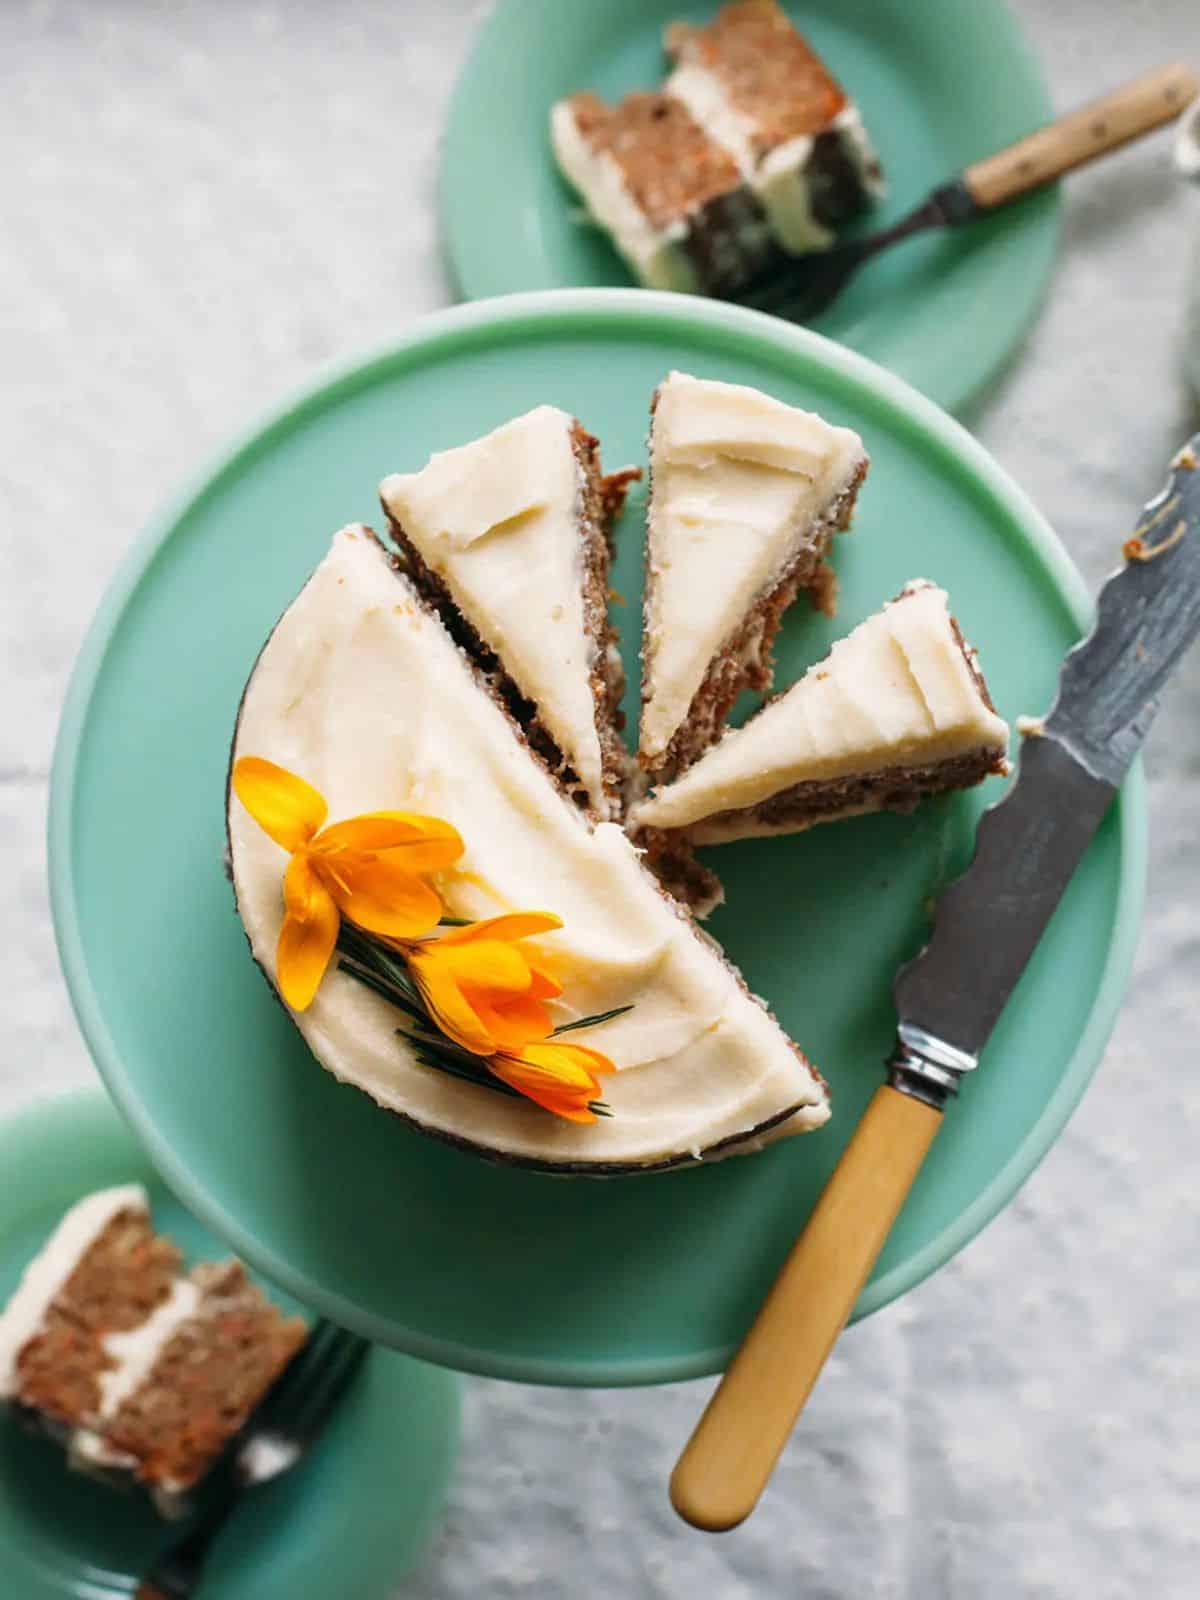 Carrot Cake with Pineapple, Cardamom, and whipped cream cheese icing. 